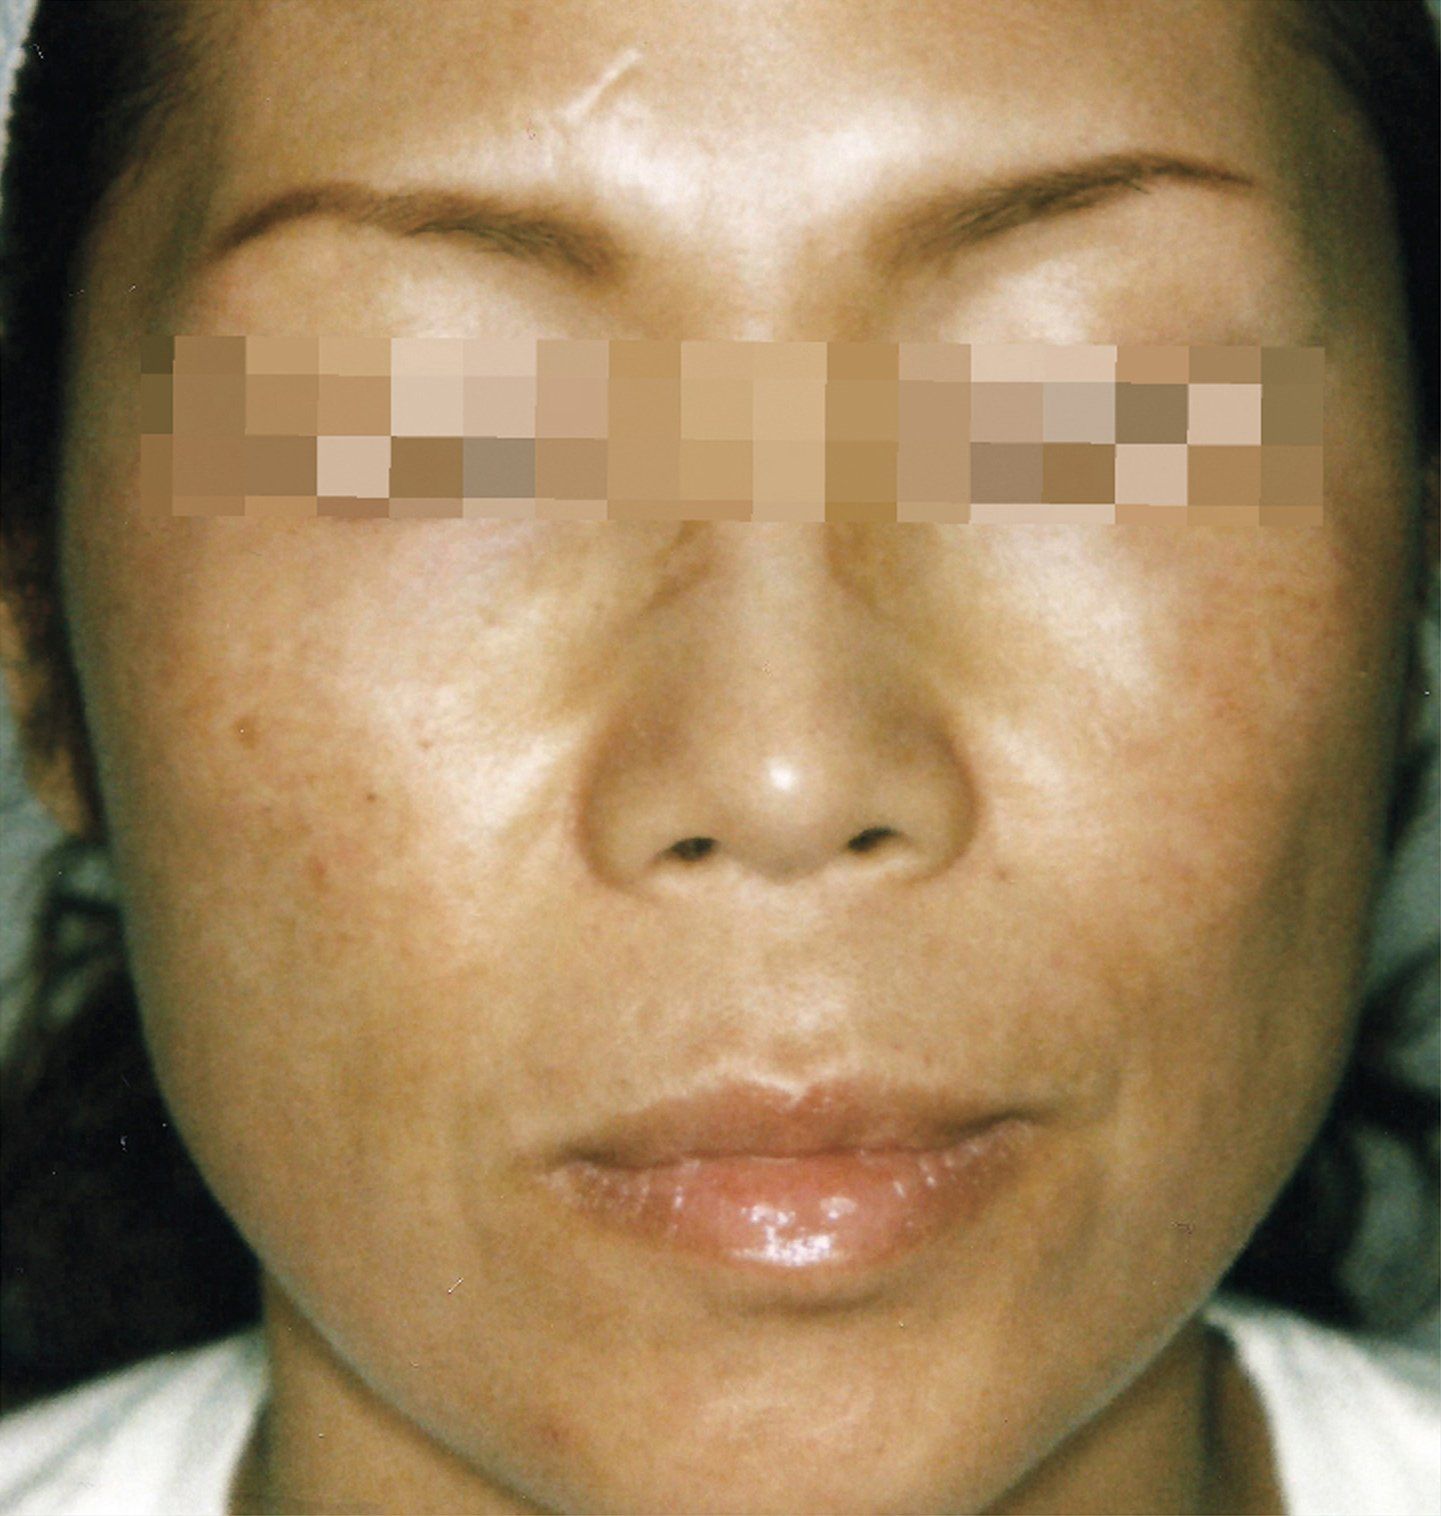 BBL Before Photo - A close up of a woman's face